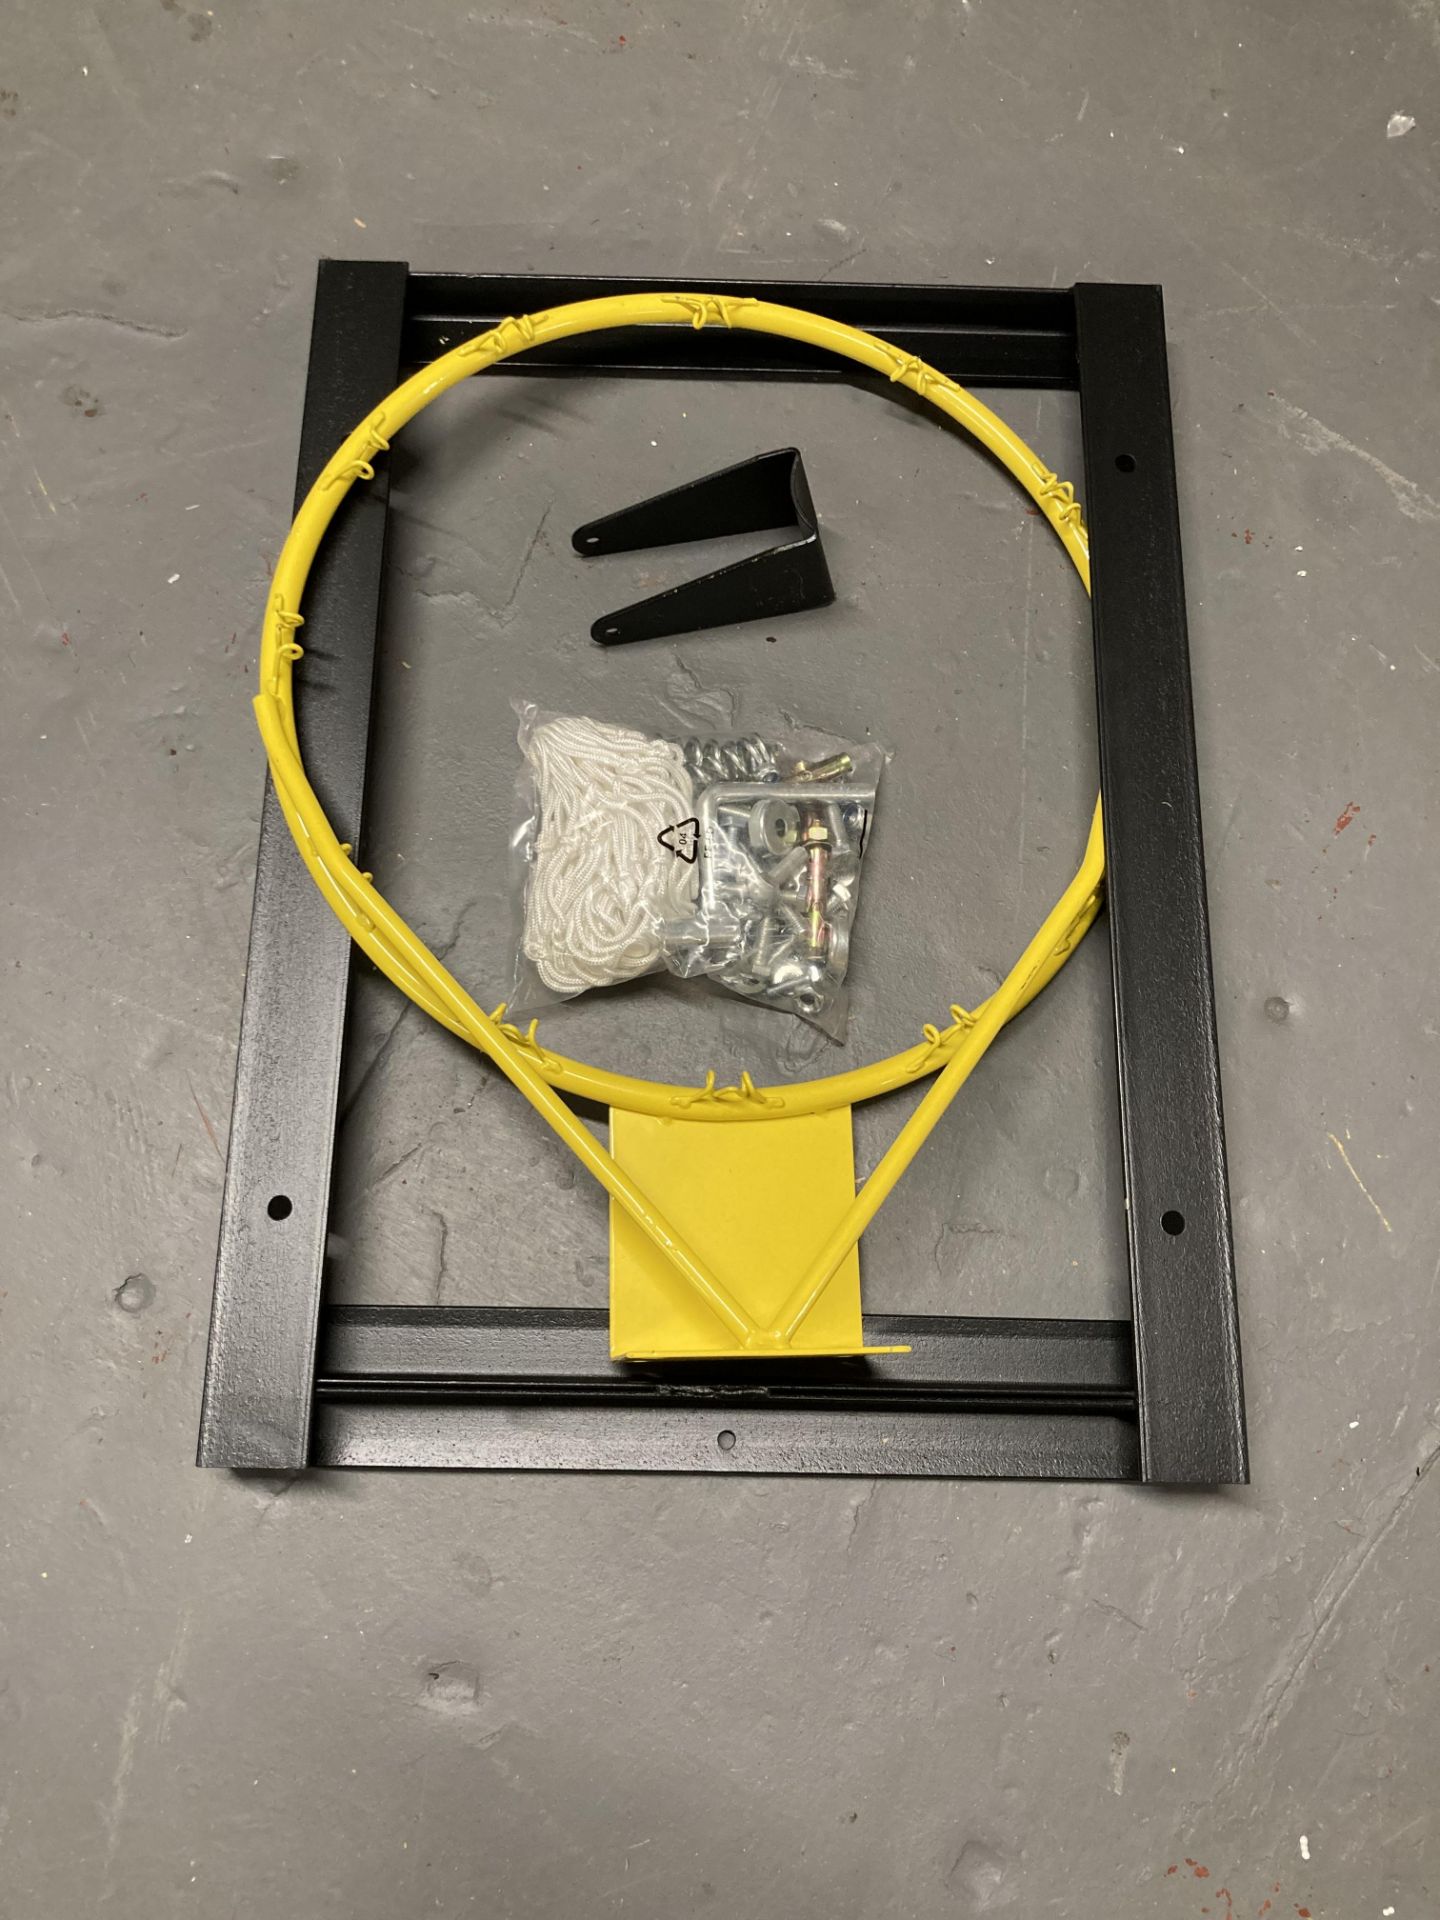 An un-used basket ball hoop with bracket and net